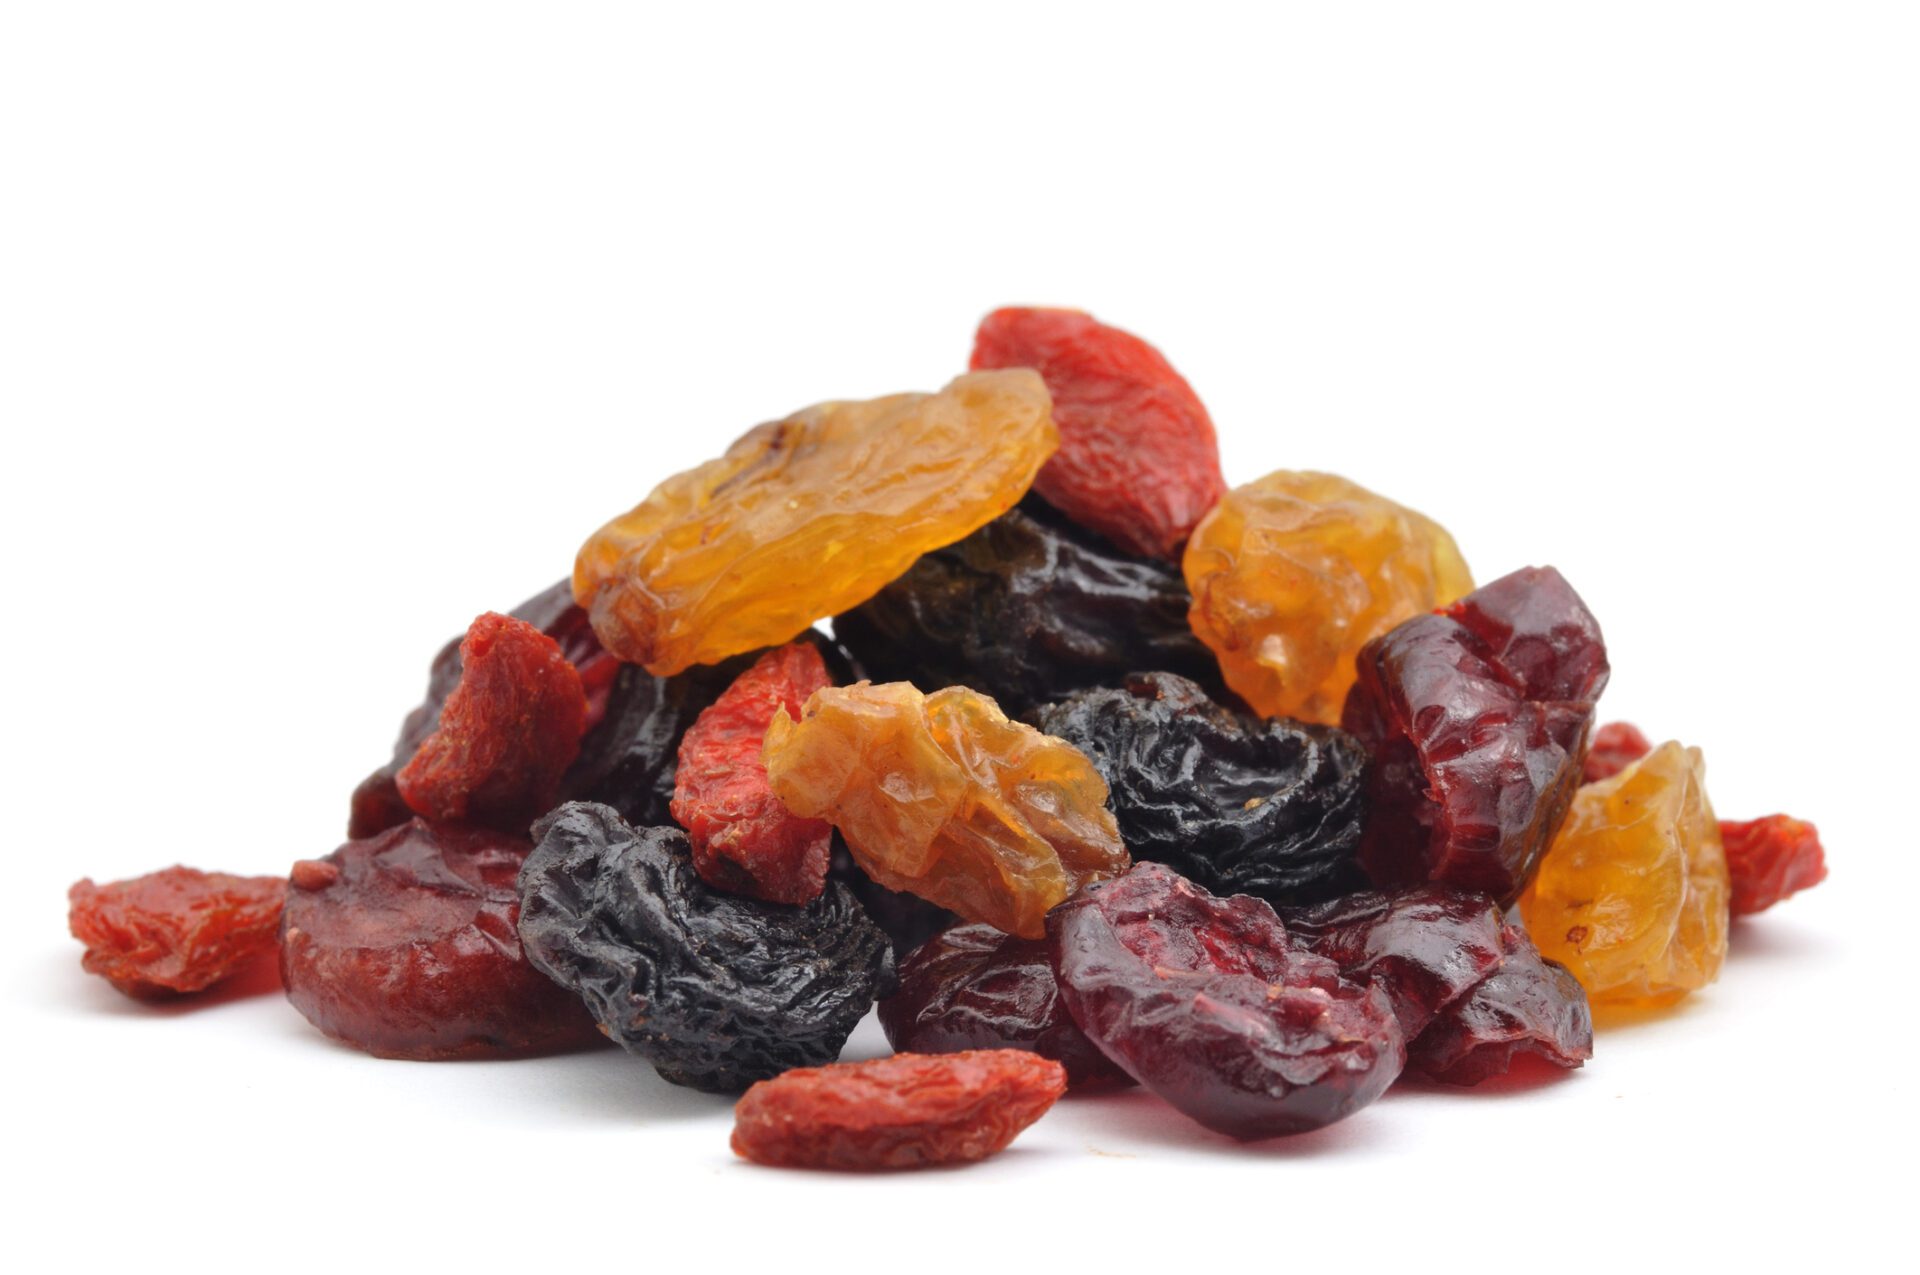 A variety of dried fruit can be made using oven drying or a dehydrator.